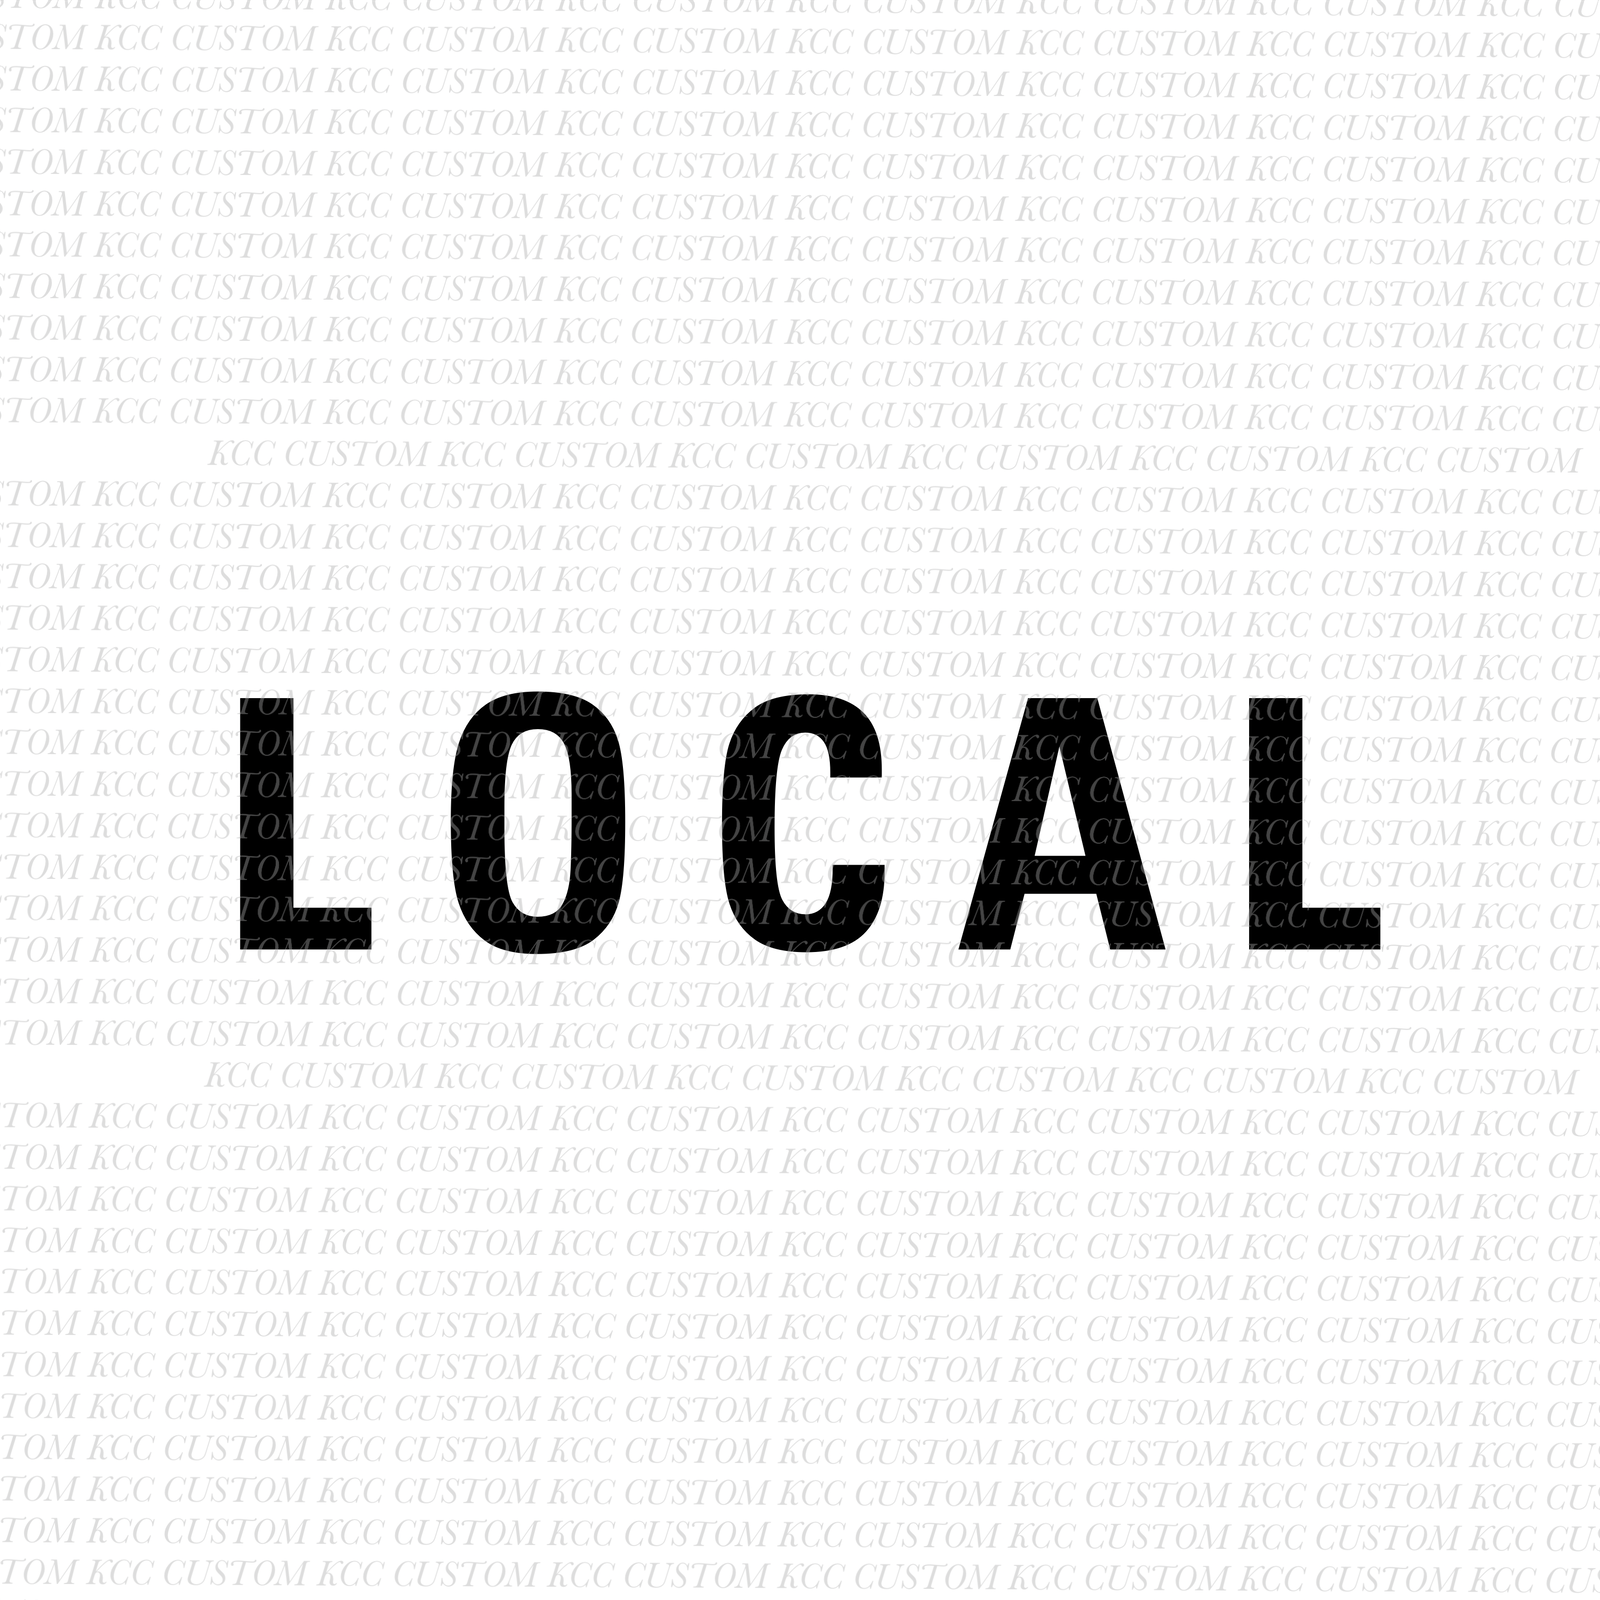 Local- Fabric patch